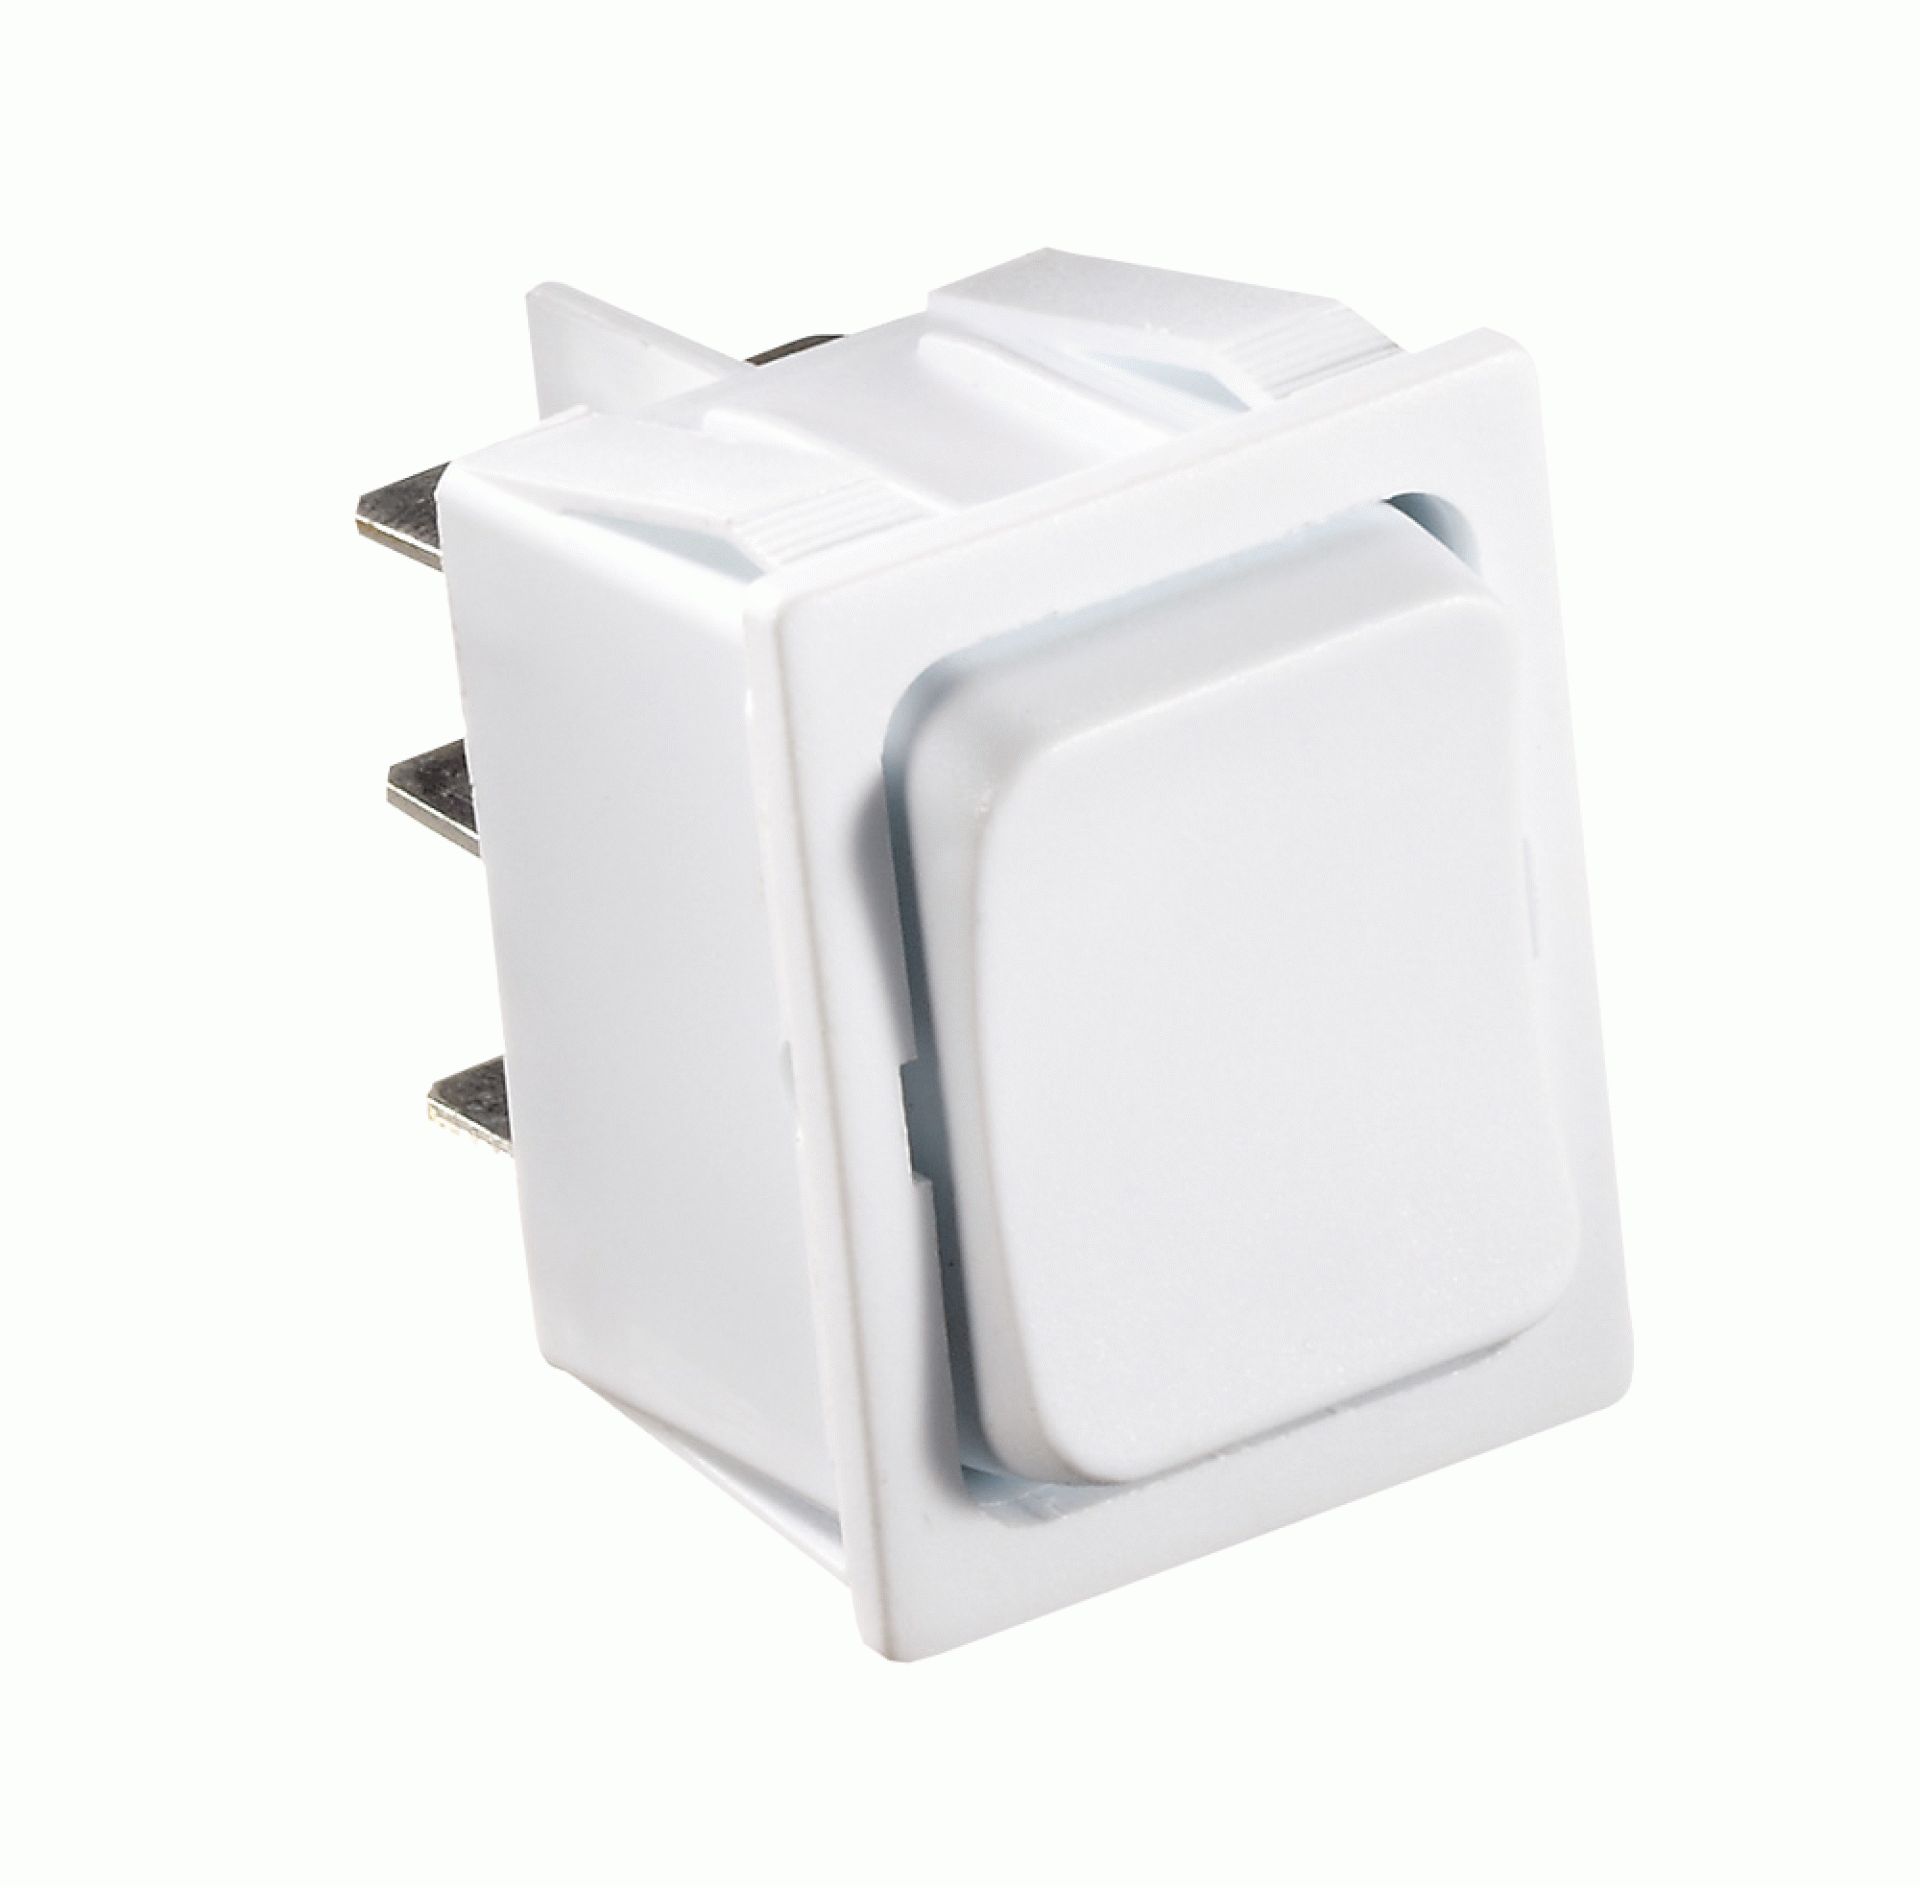 RV DESIGNER COLLECTION | S475 | DPDT On/Off/On Momentary Rocker Switch White